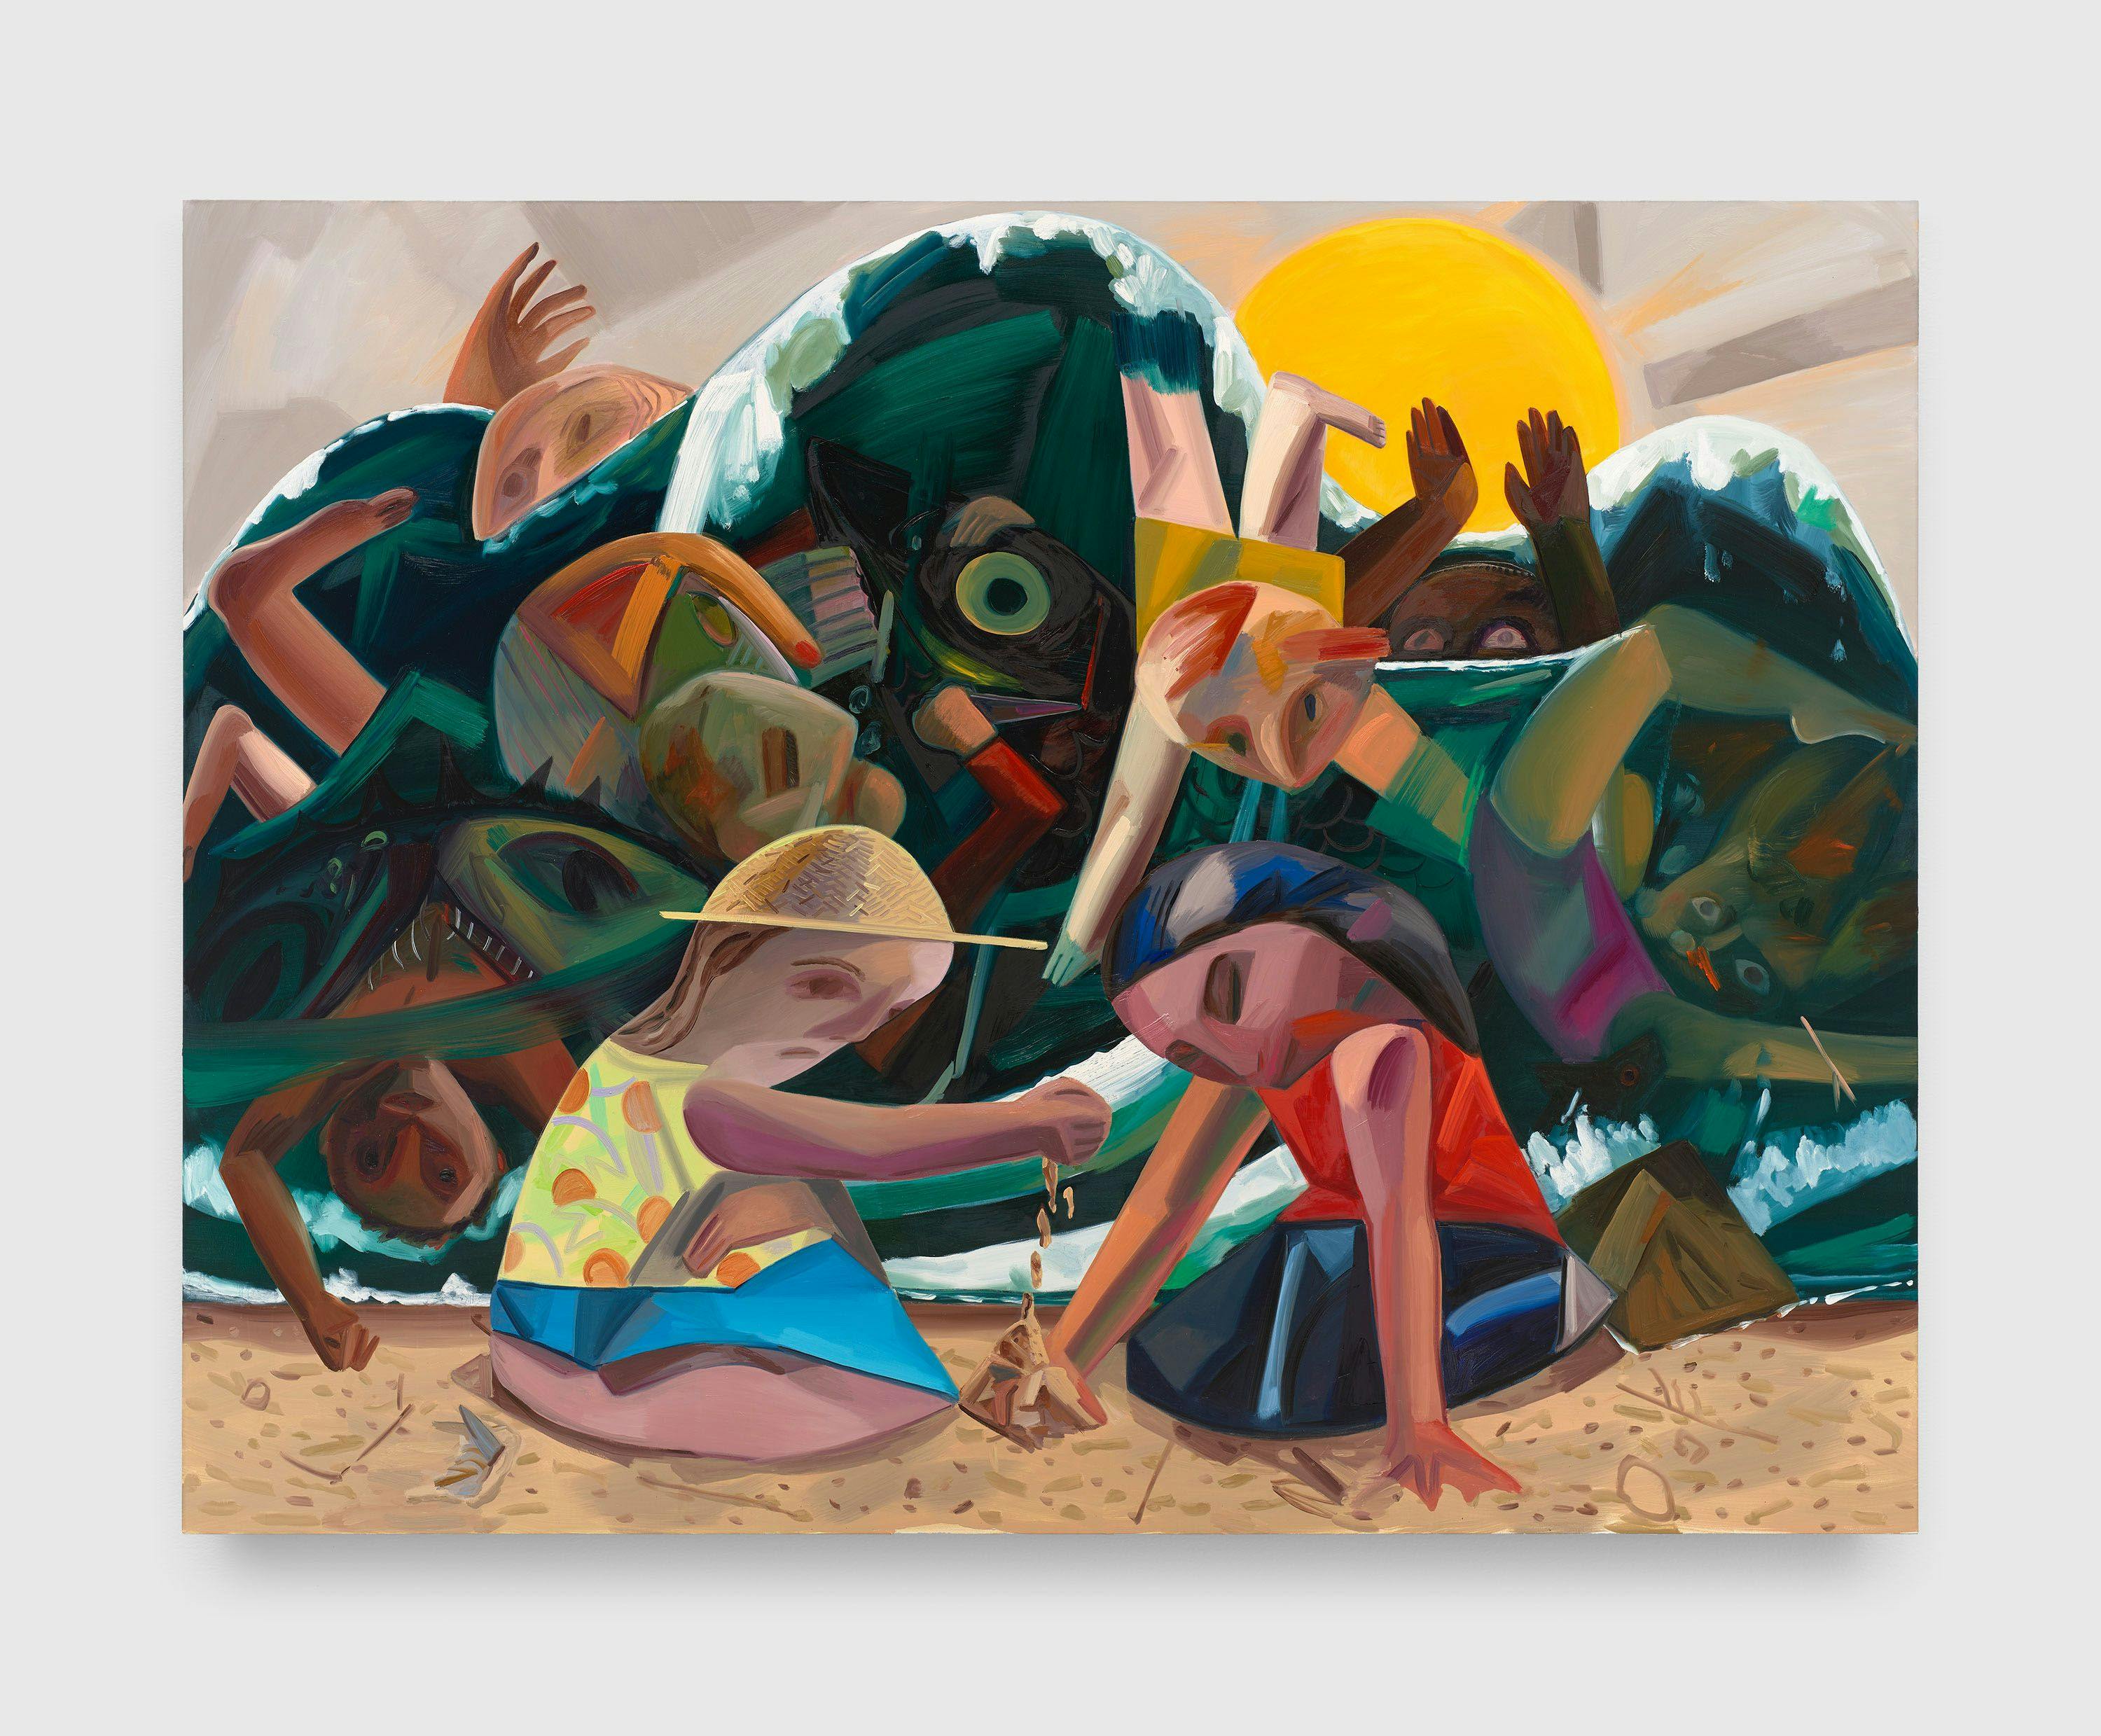 A painting by Dana Schutz, titled Big Wave, dated 2016.